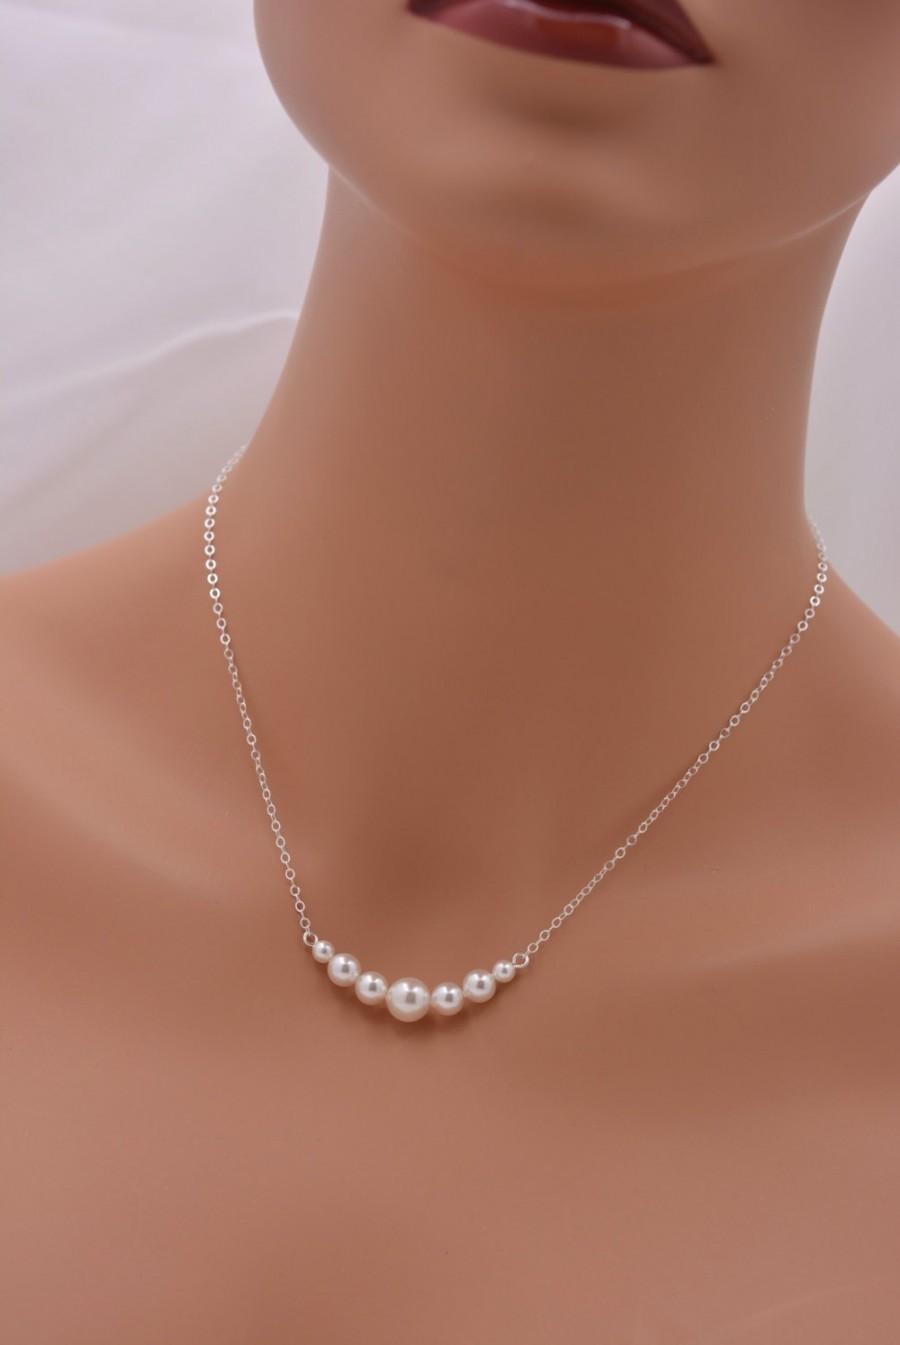 Hochzeit - Set of 6 Pearl Necklaces, 6 Bridesmaid Pearl Necklaces, 925 Sterling Silver Necklaces, Pearl Bar Necklace, Floating Pearls 0305